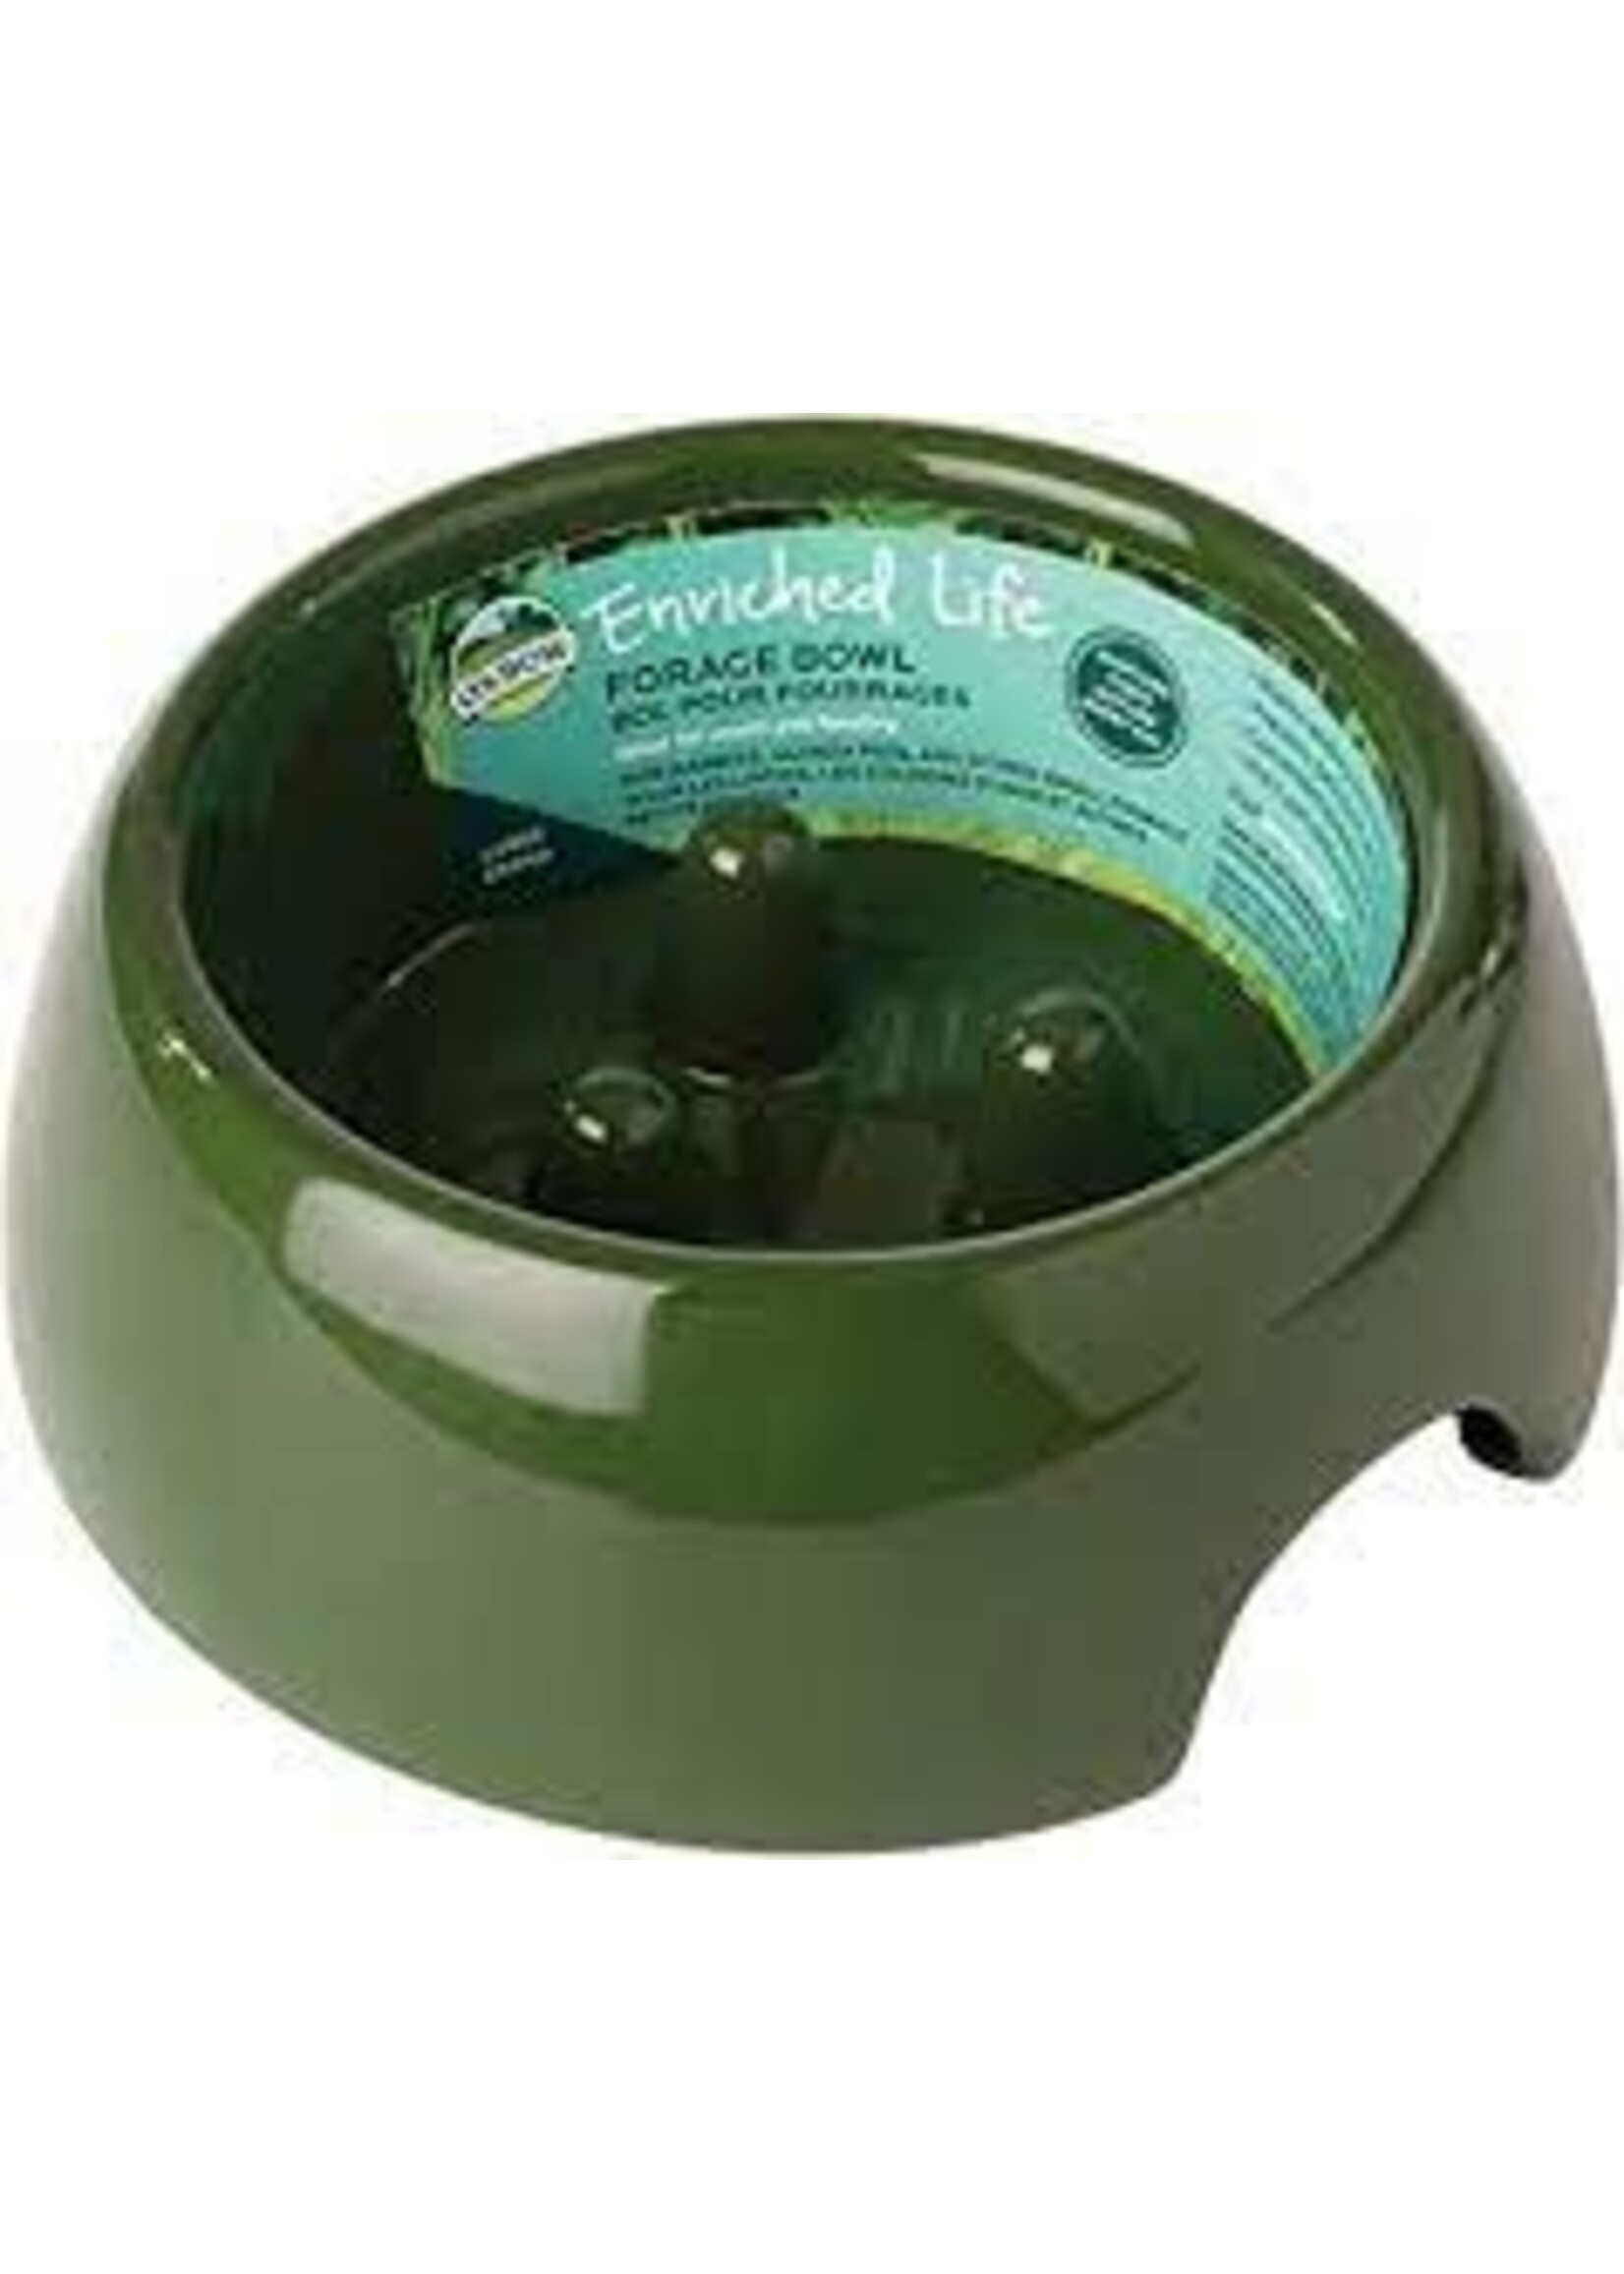 Oxbow Oxbow Enriched Life Forage Bowl